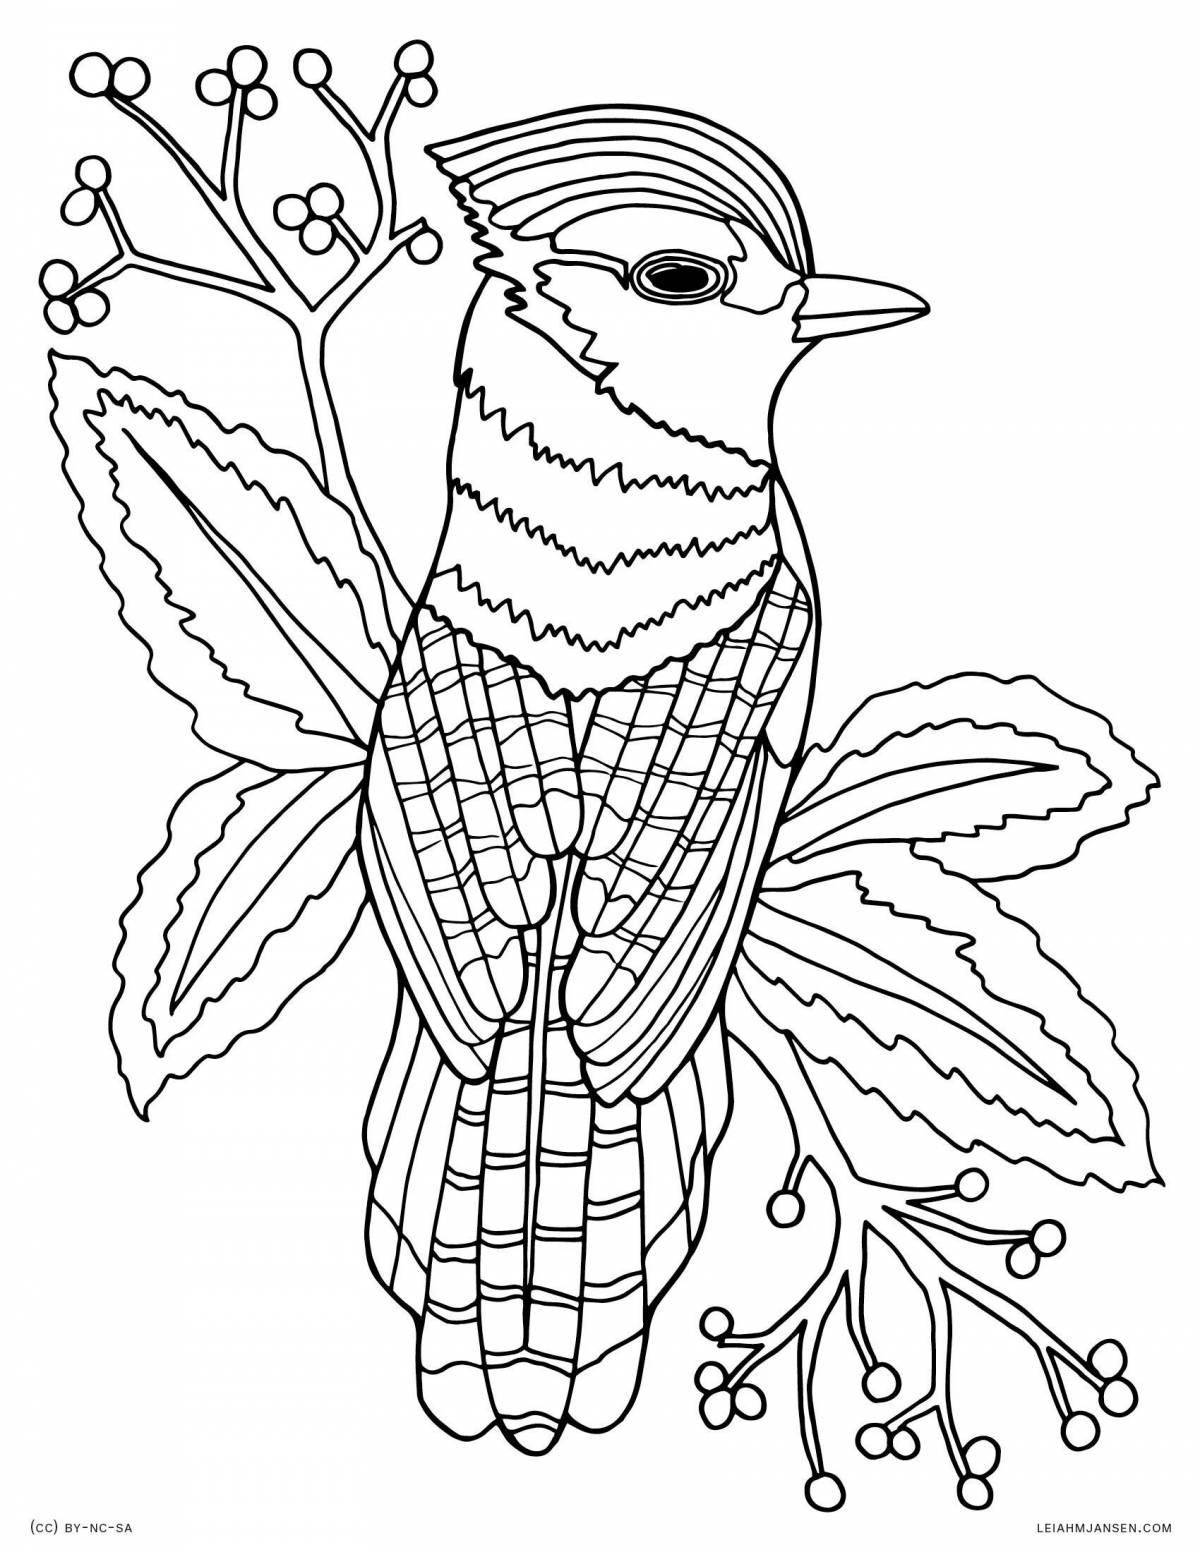 Deluxe bird of paradise coloring book